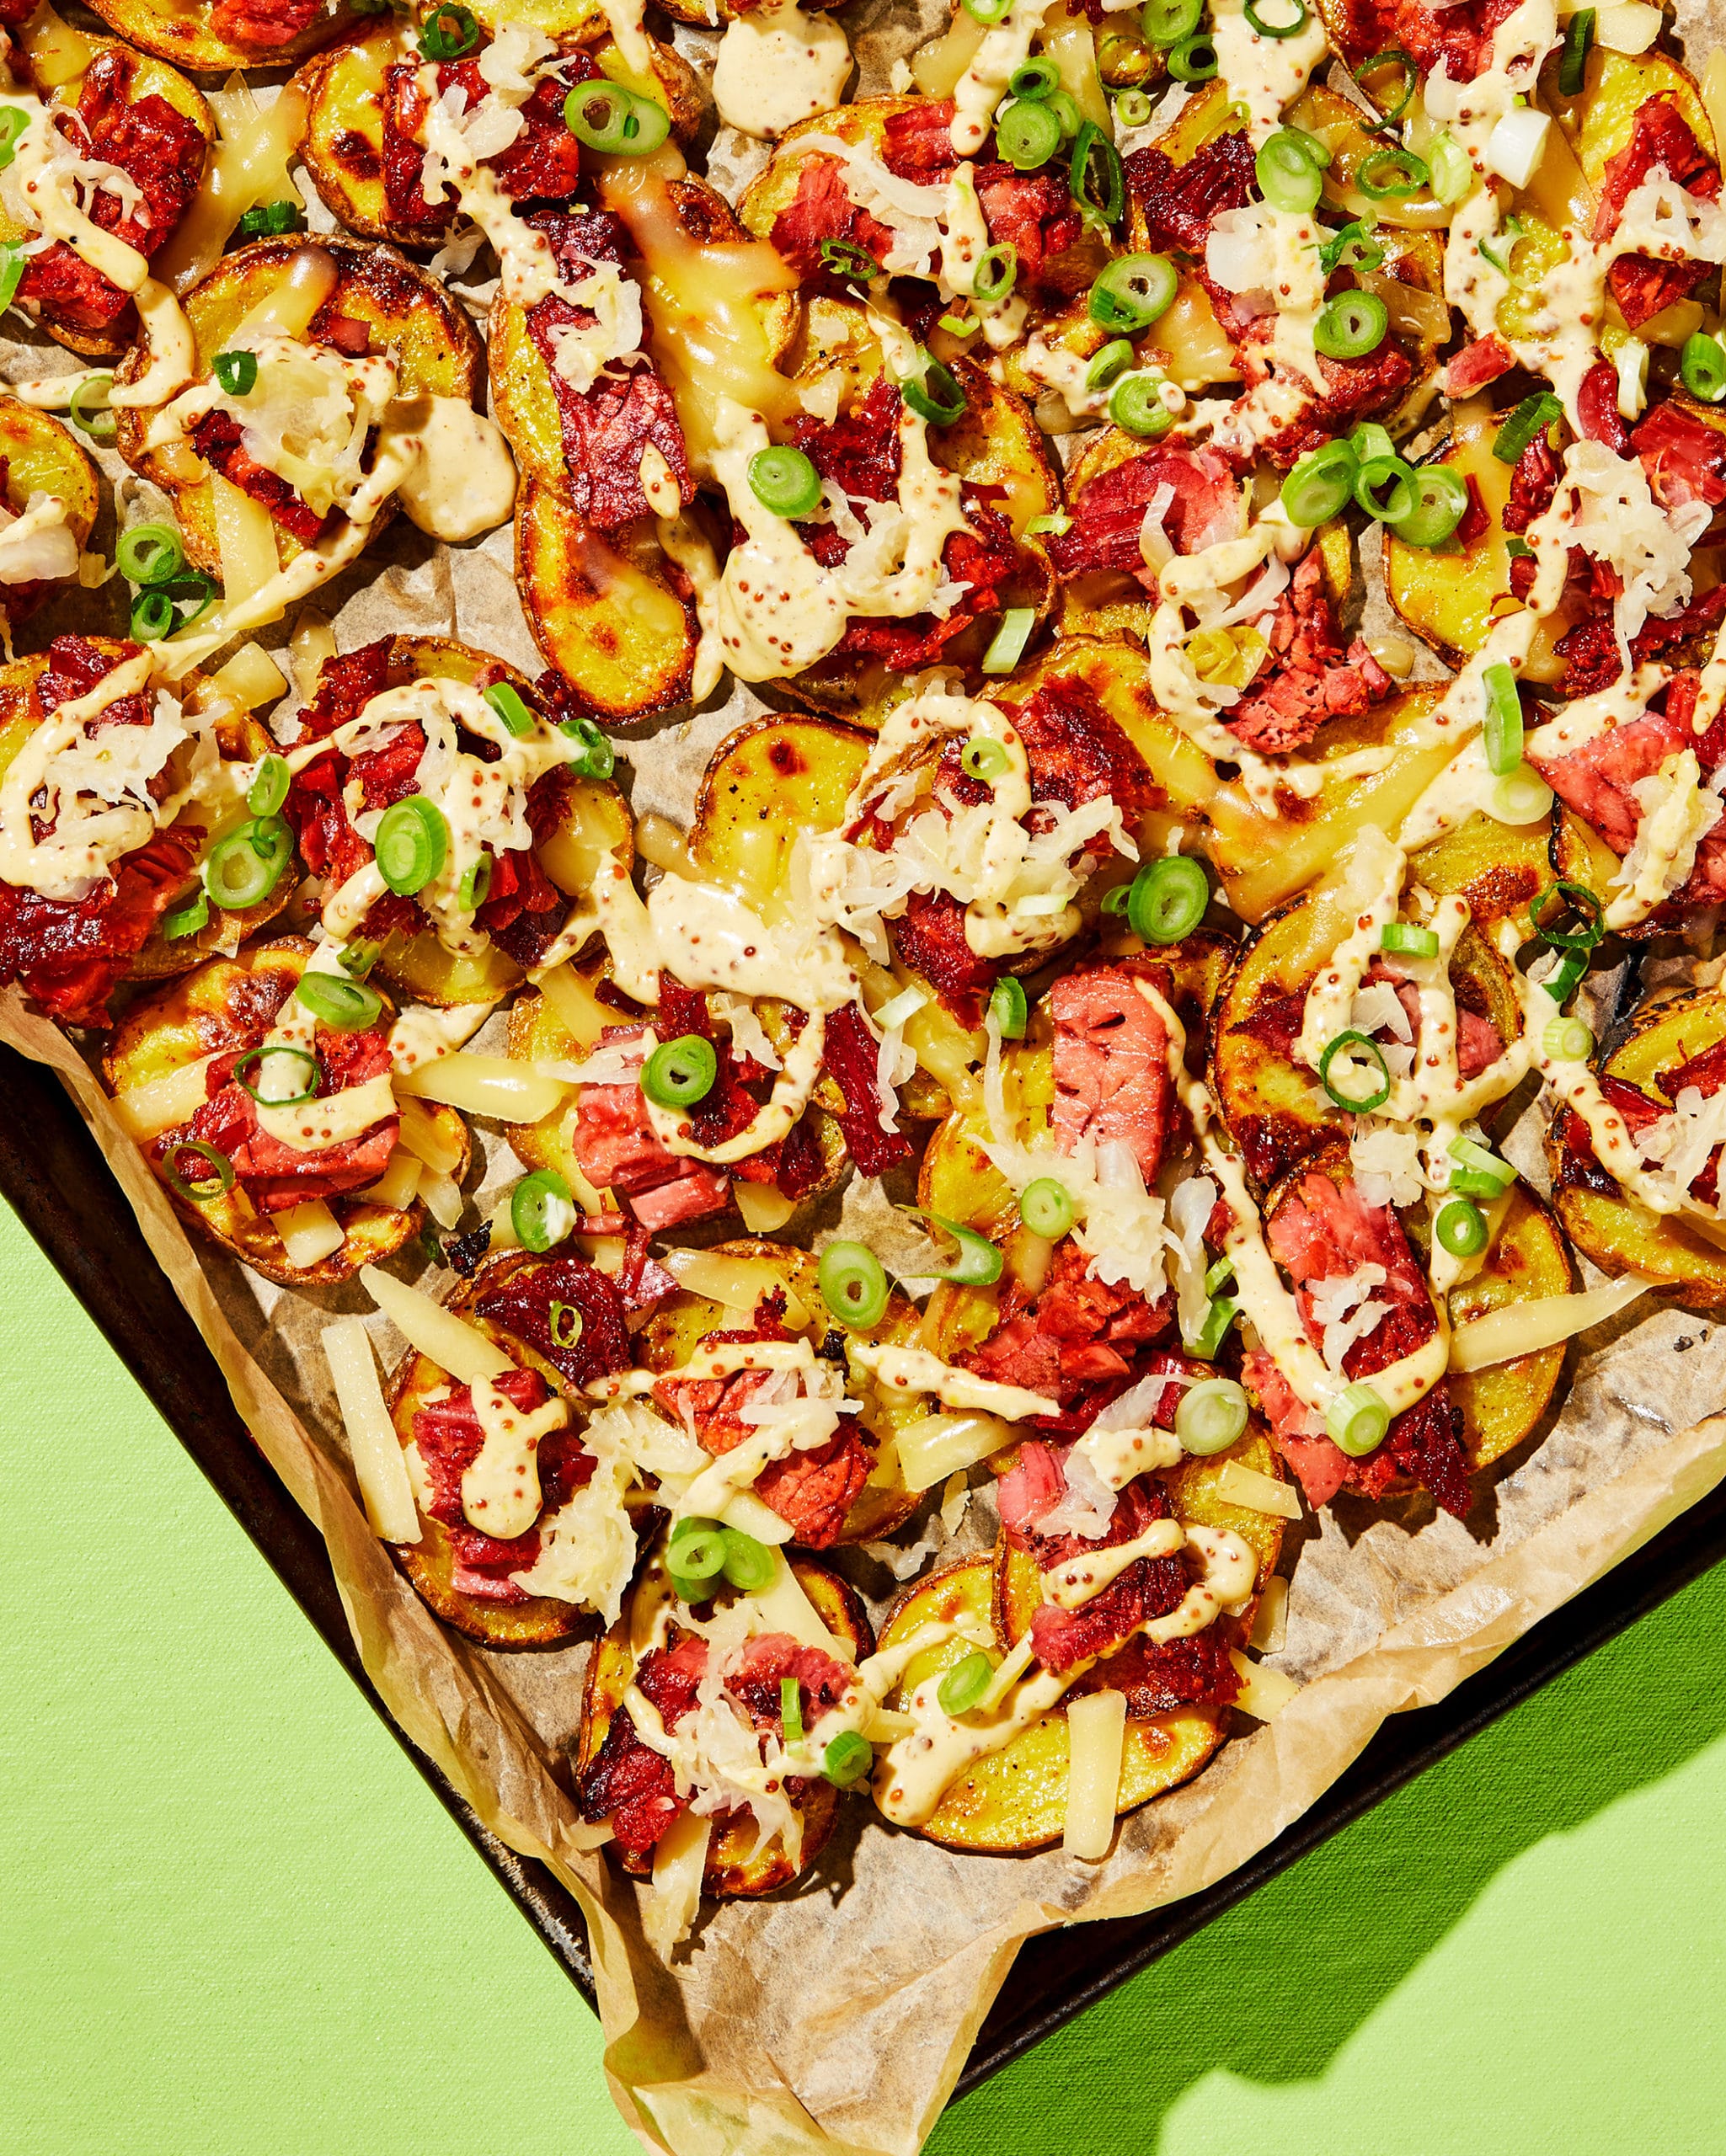 St. Patrick's Day Irish Nachos with potatoes, corn beef, and all the fixins